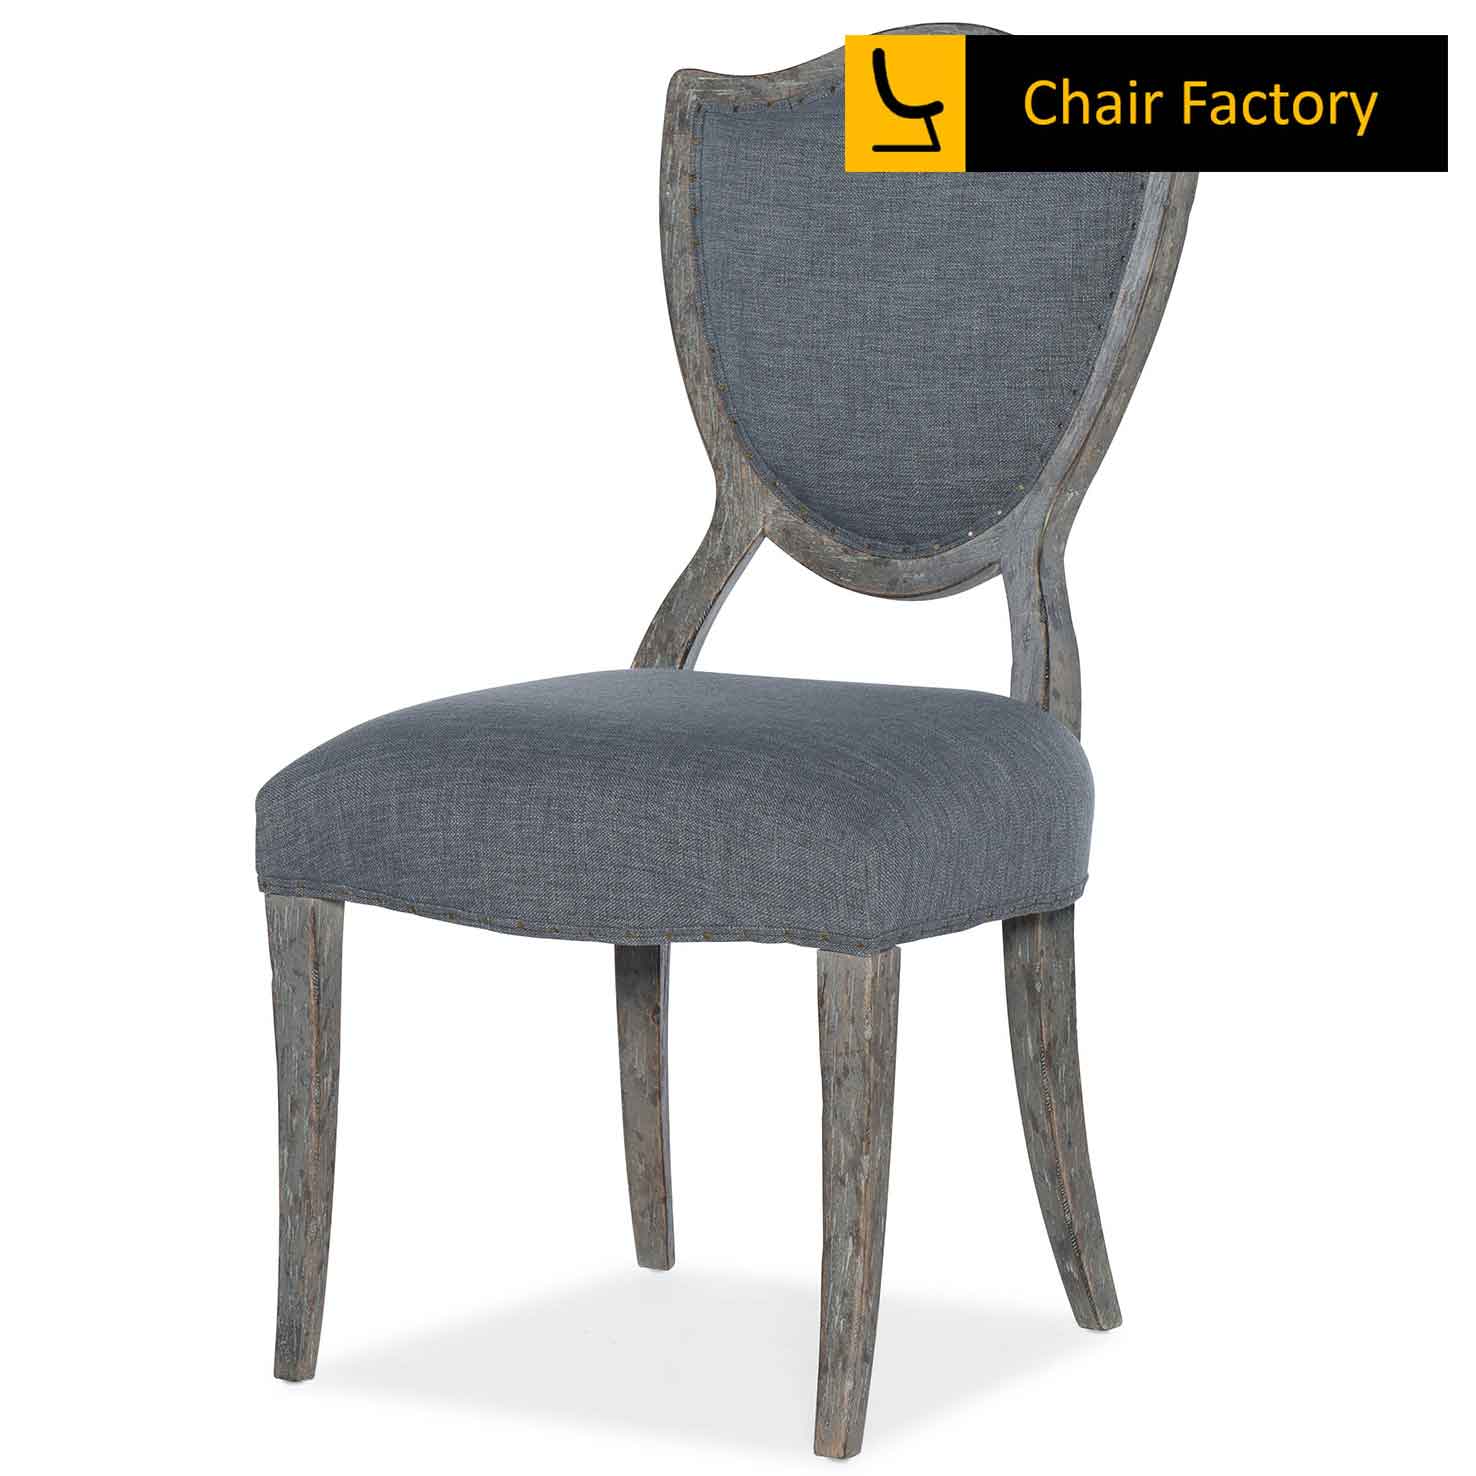 JeanSteinhart Antiqua without Arms dining chair 